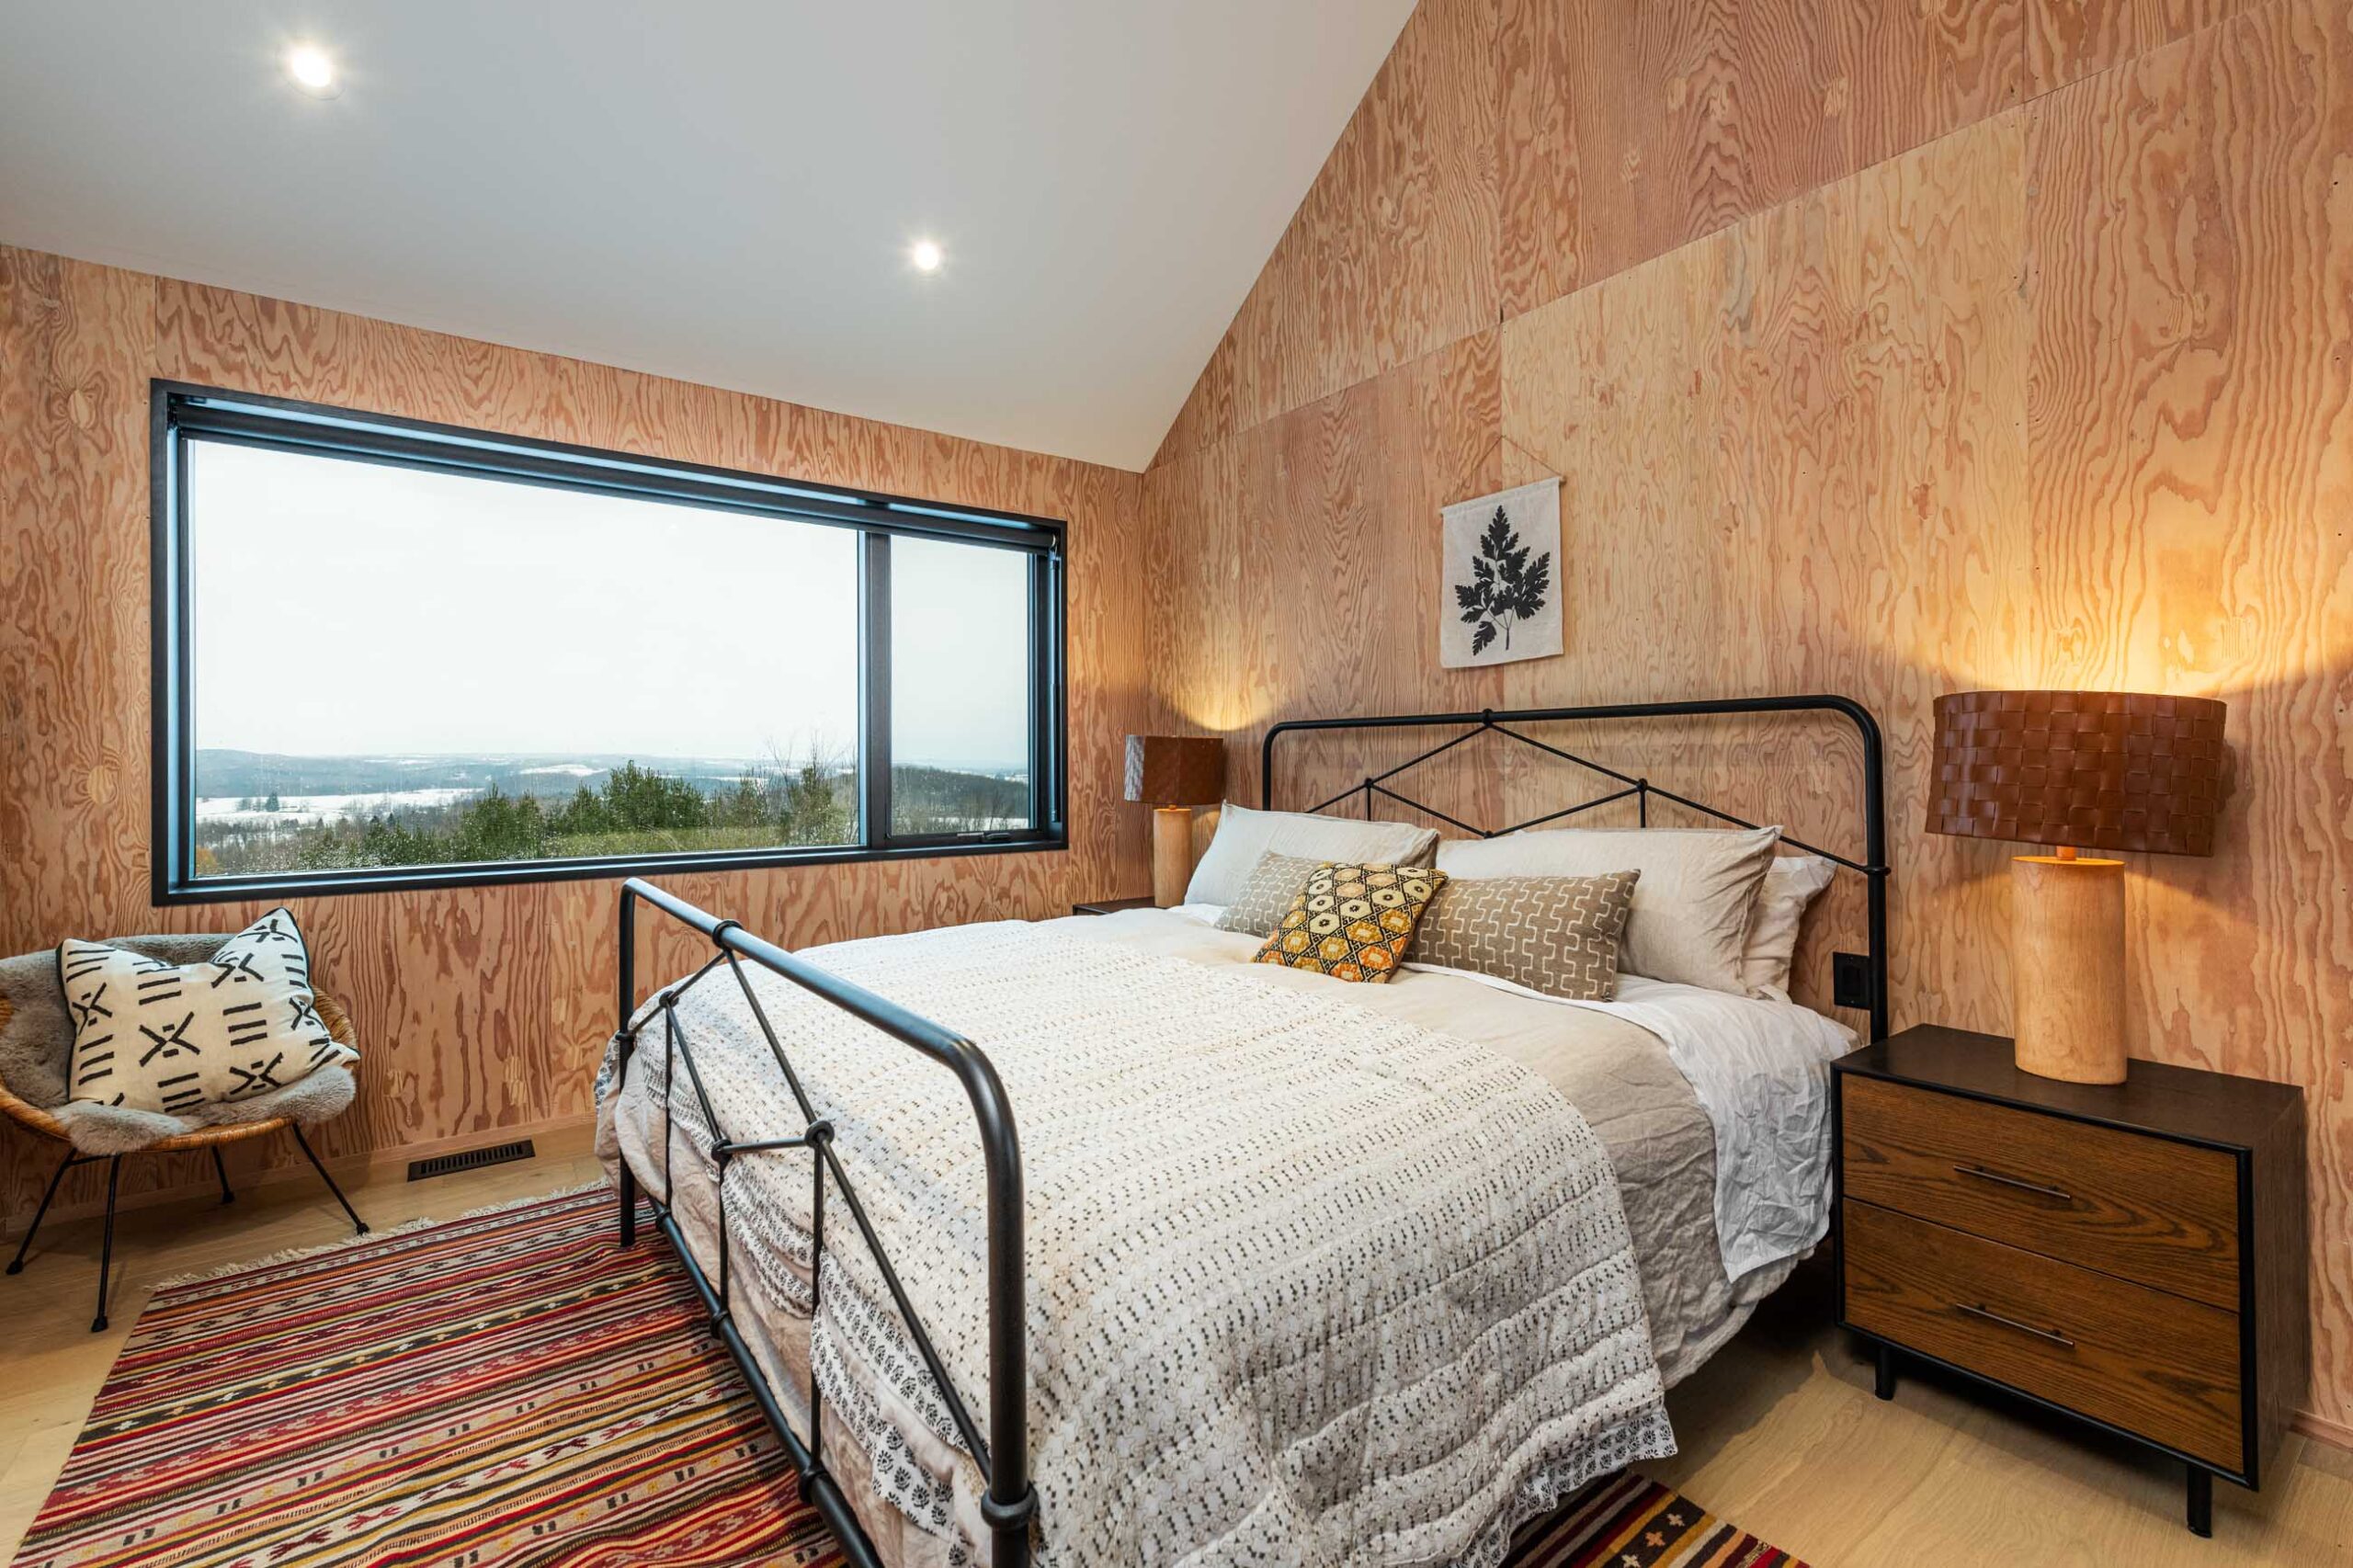 Bedroom in a Custom Scandi-style Cabin built by Blake Farrow Project Management Inc.